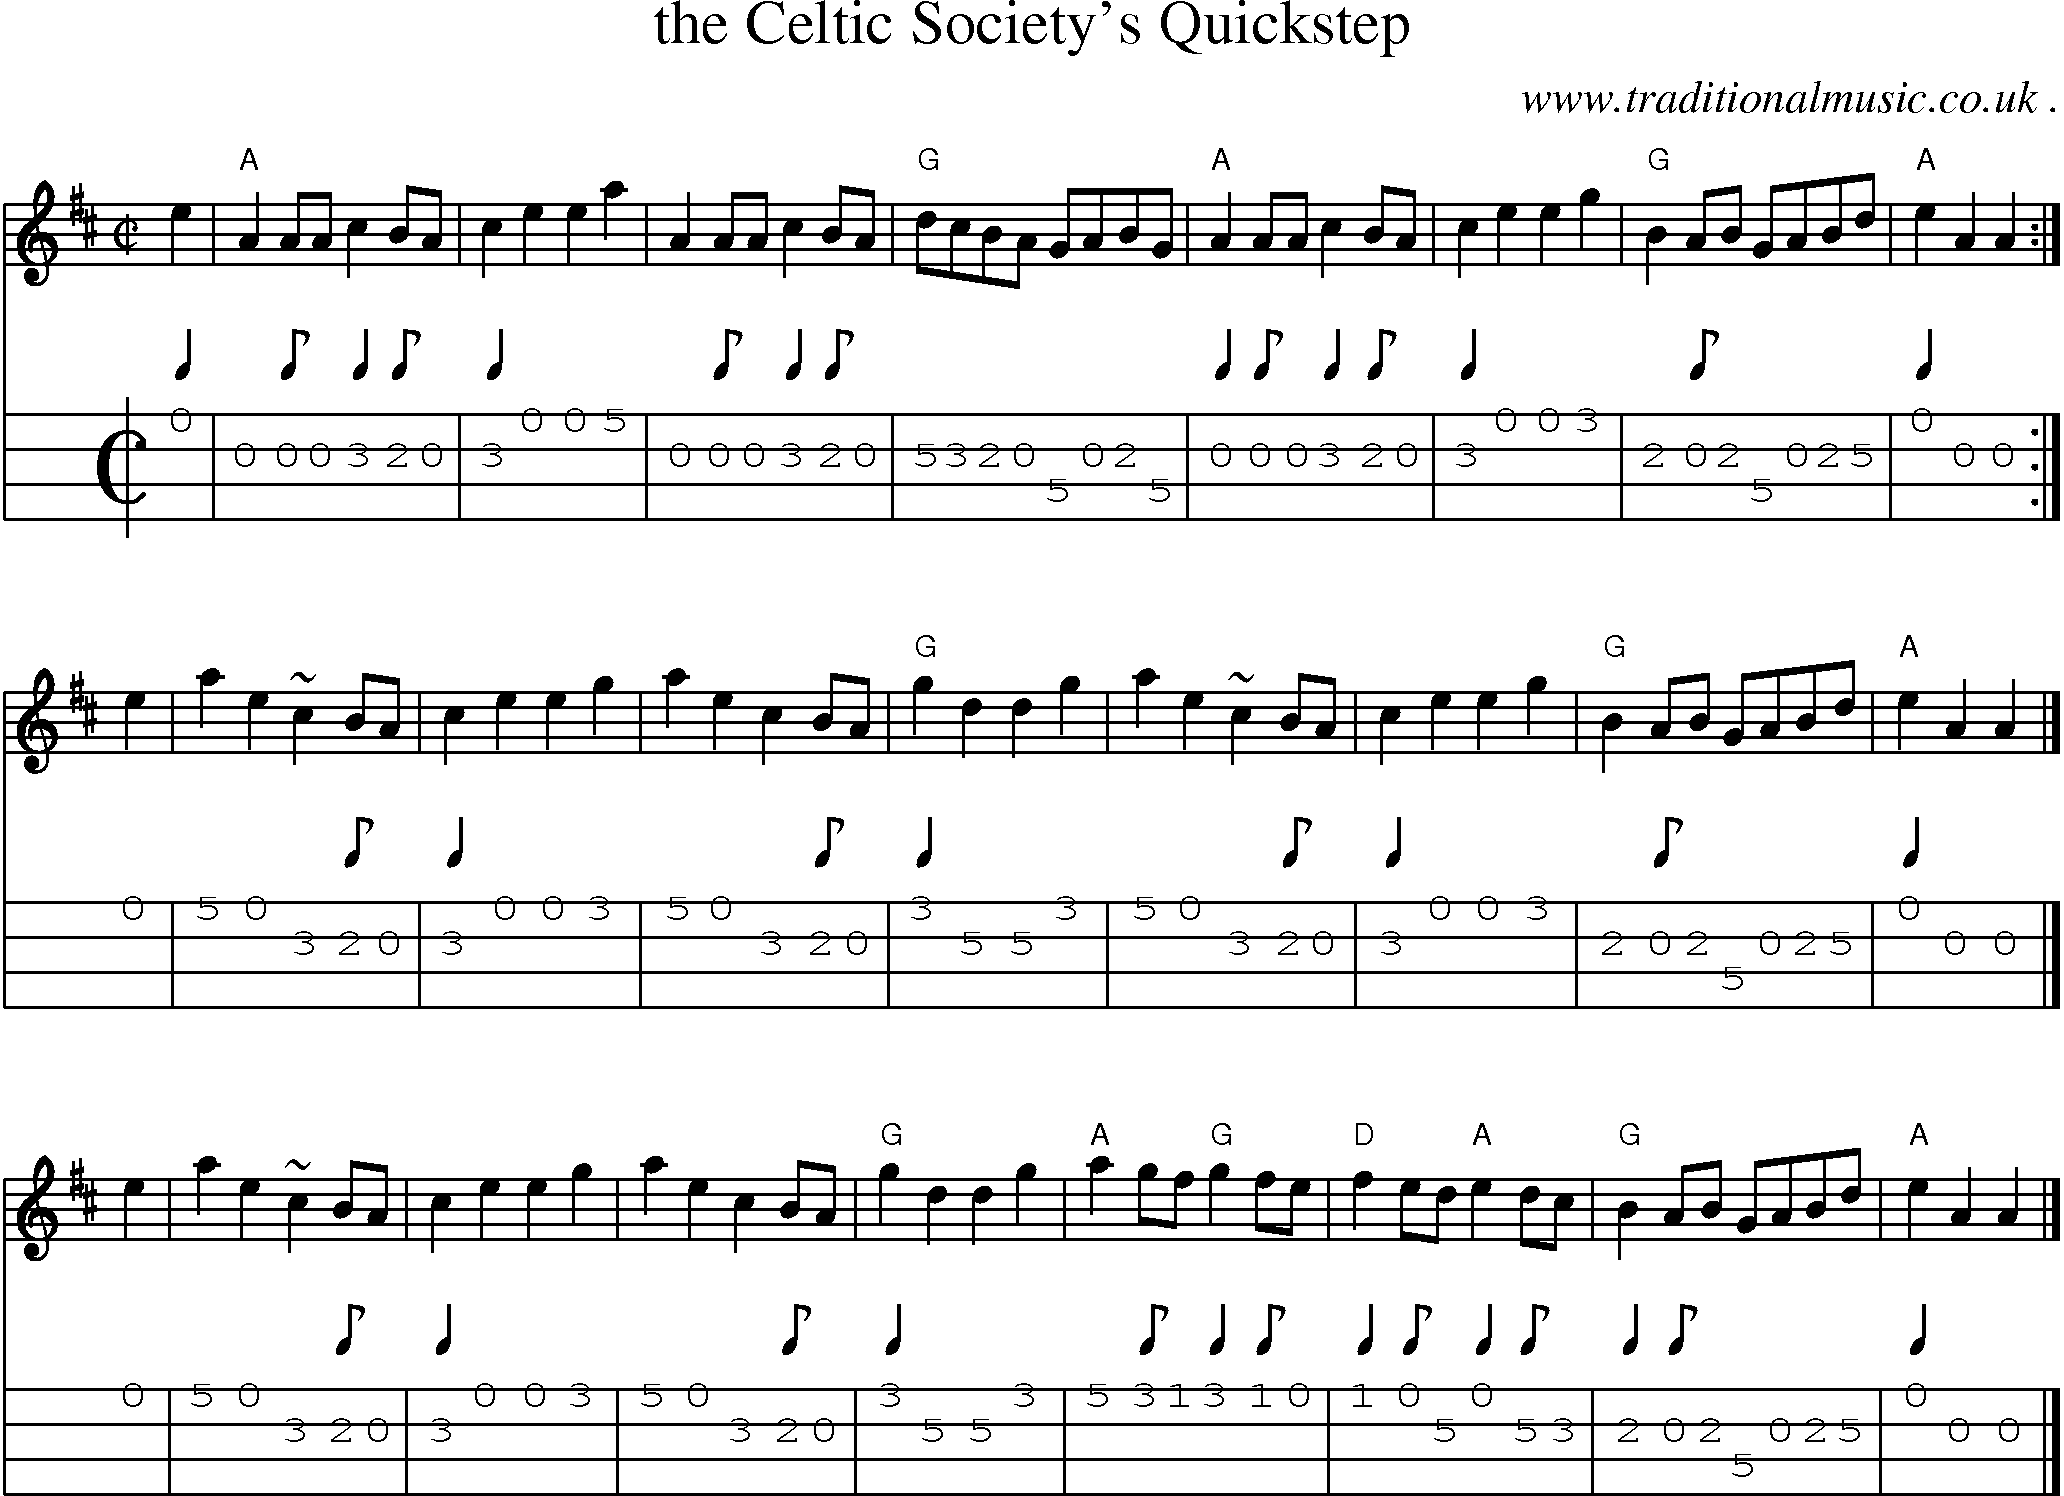 Sheet-music  score, Chords and Mandolin Tabs for The Celtic Societys Quickstep